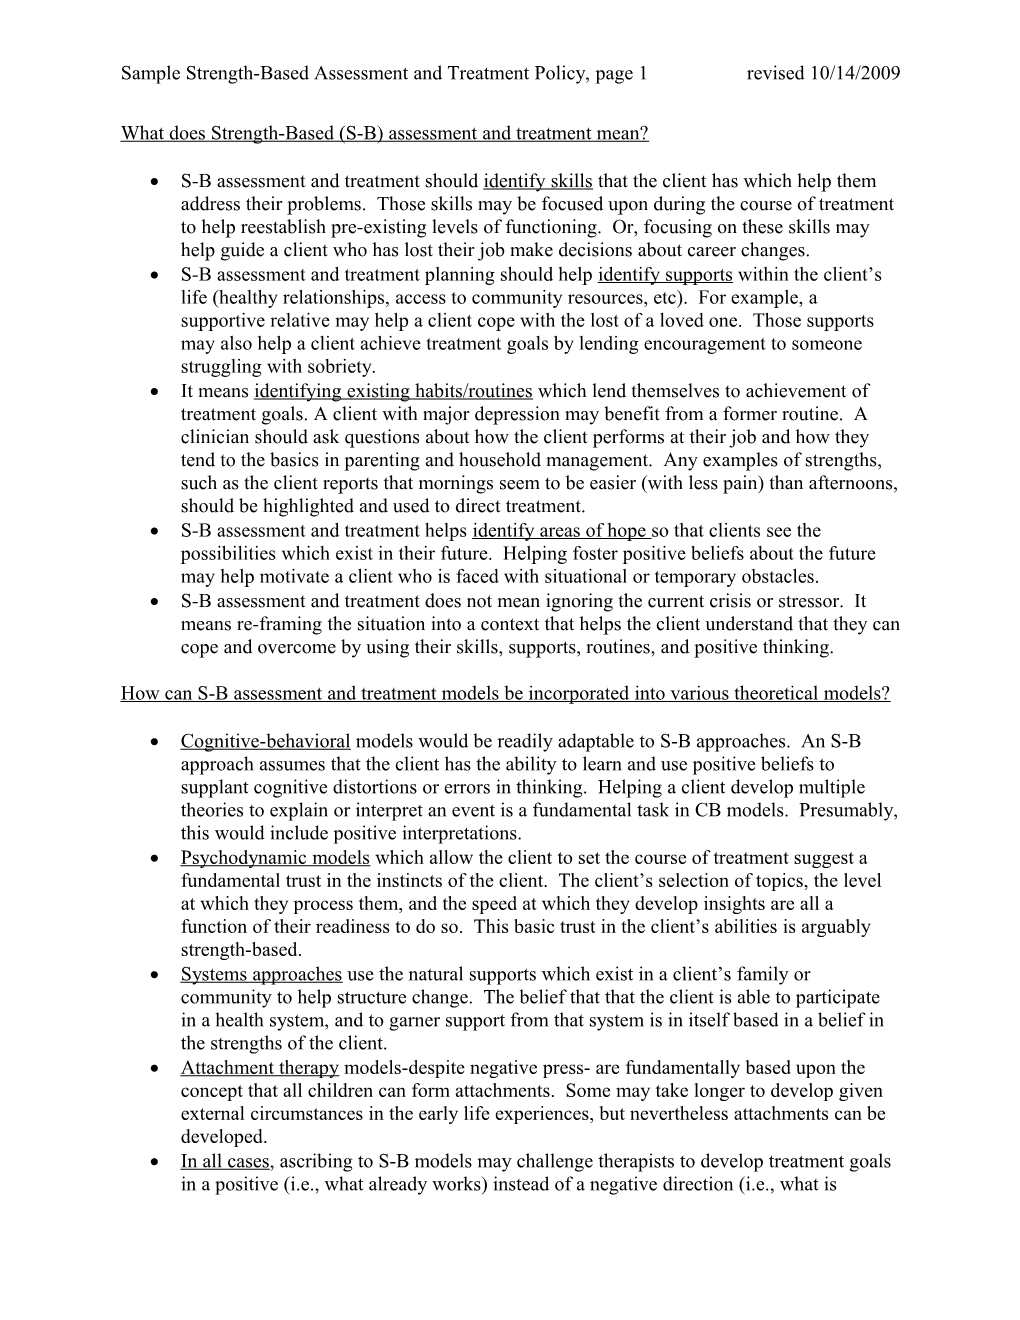 Sample Strength-Based Assessment and Treatment Policy, Page 1Revised 10/14/2009